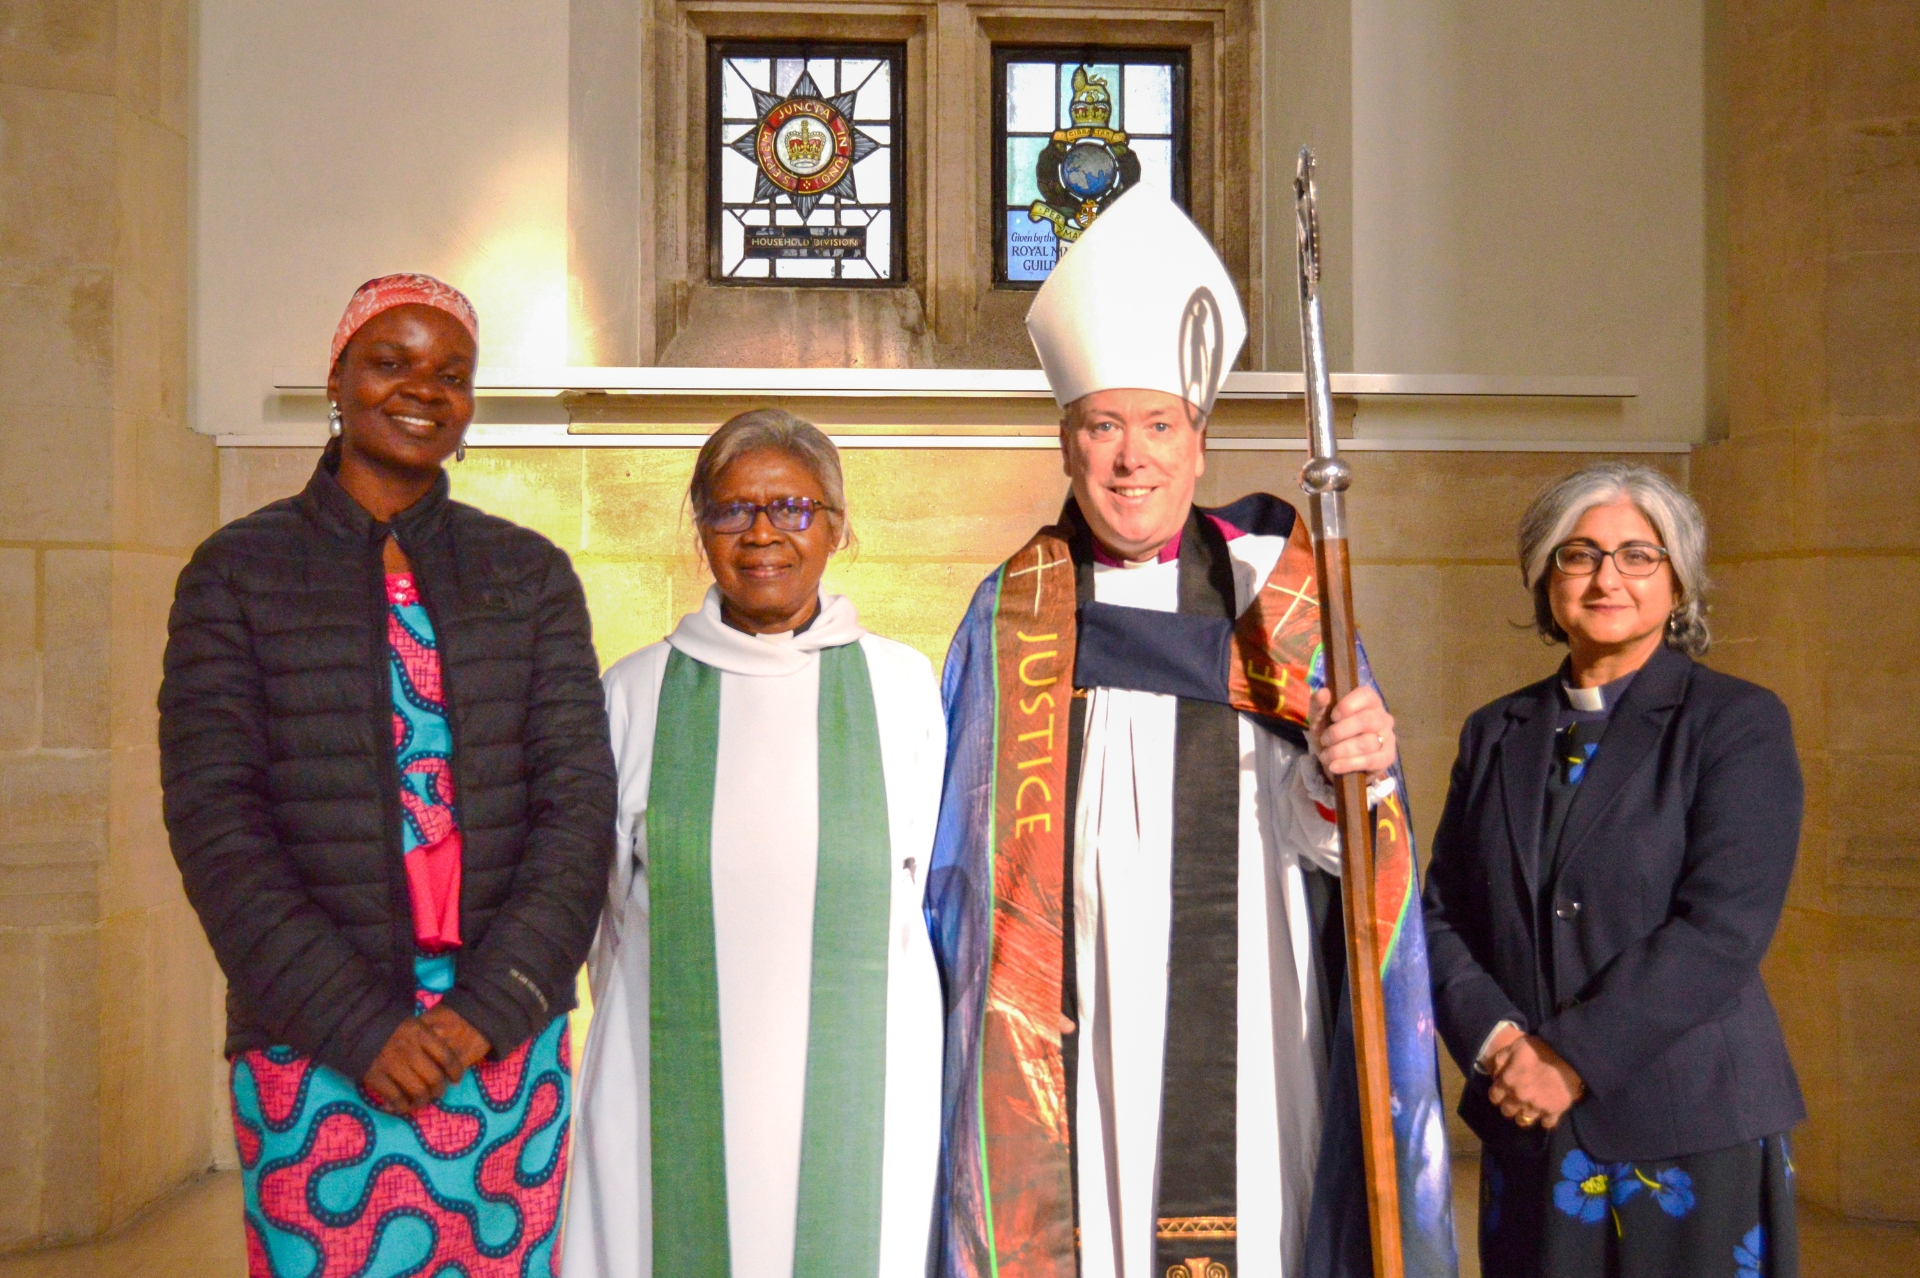 Chinenye, Rev Bev, Bishop Paul and Rev Sheila stood next to each other smiling to the camera 